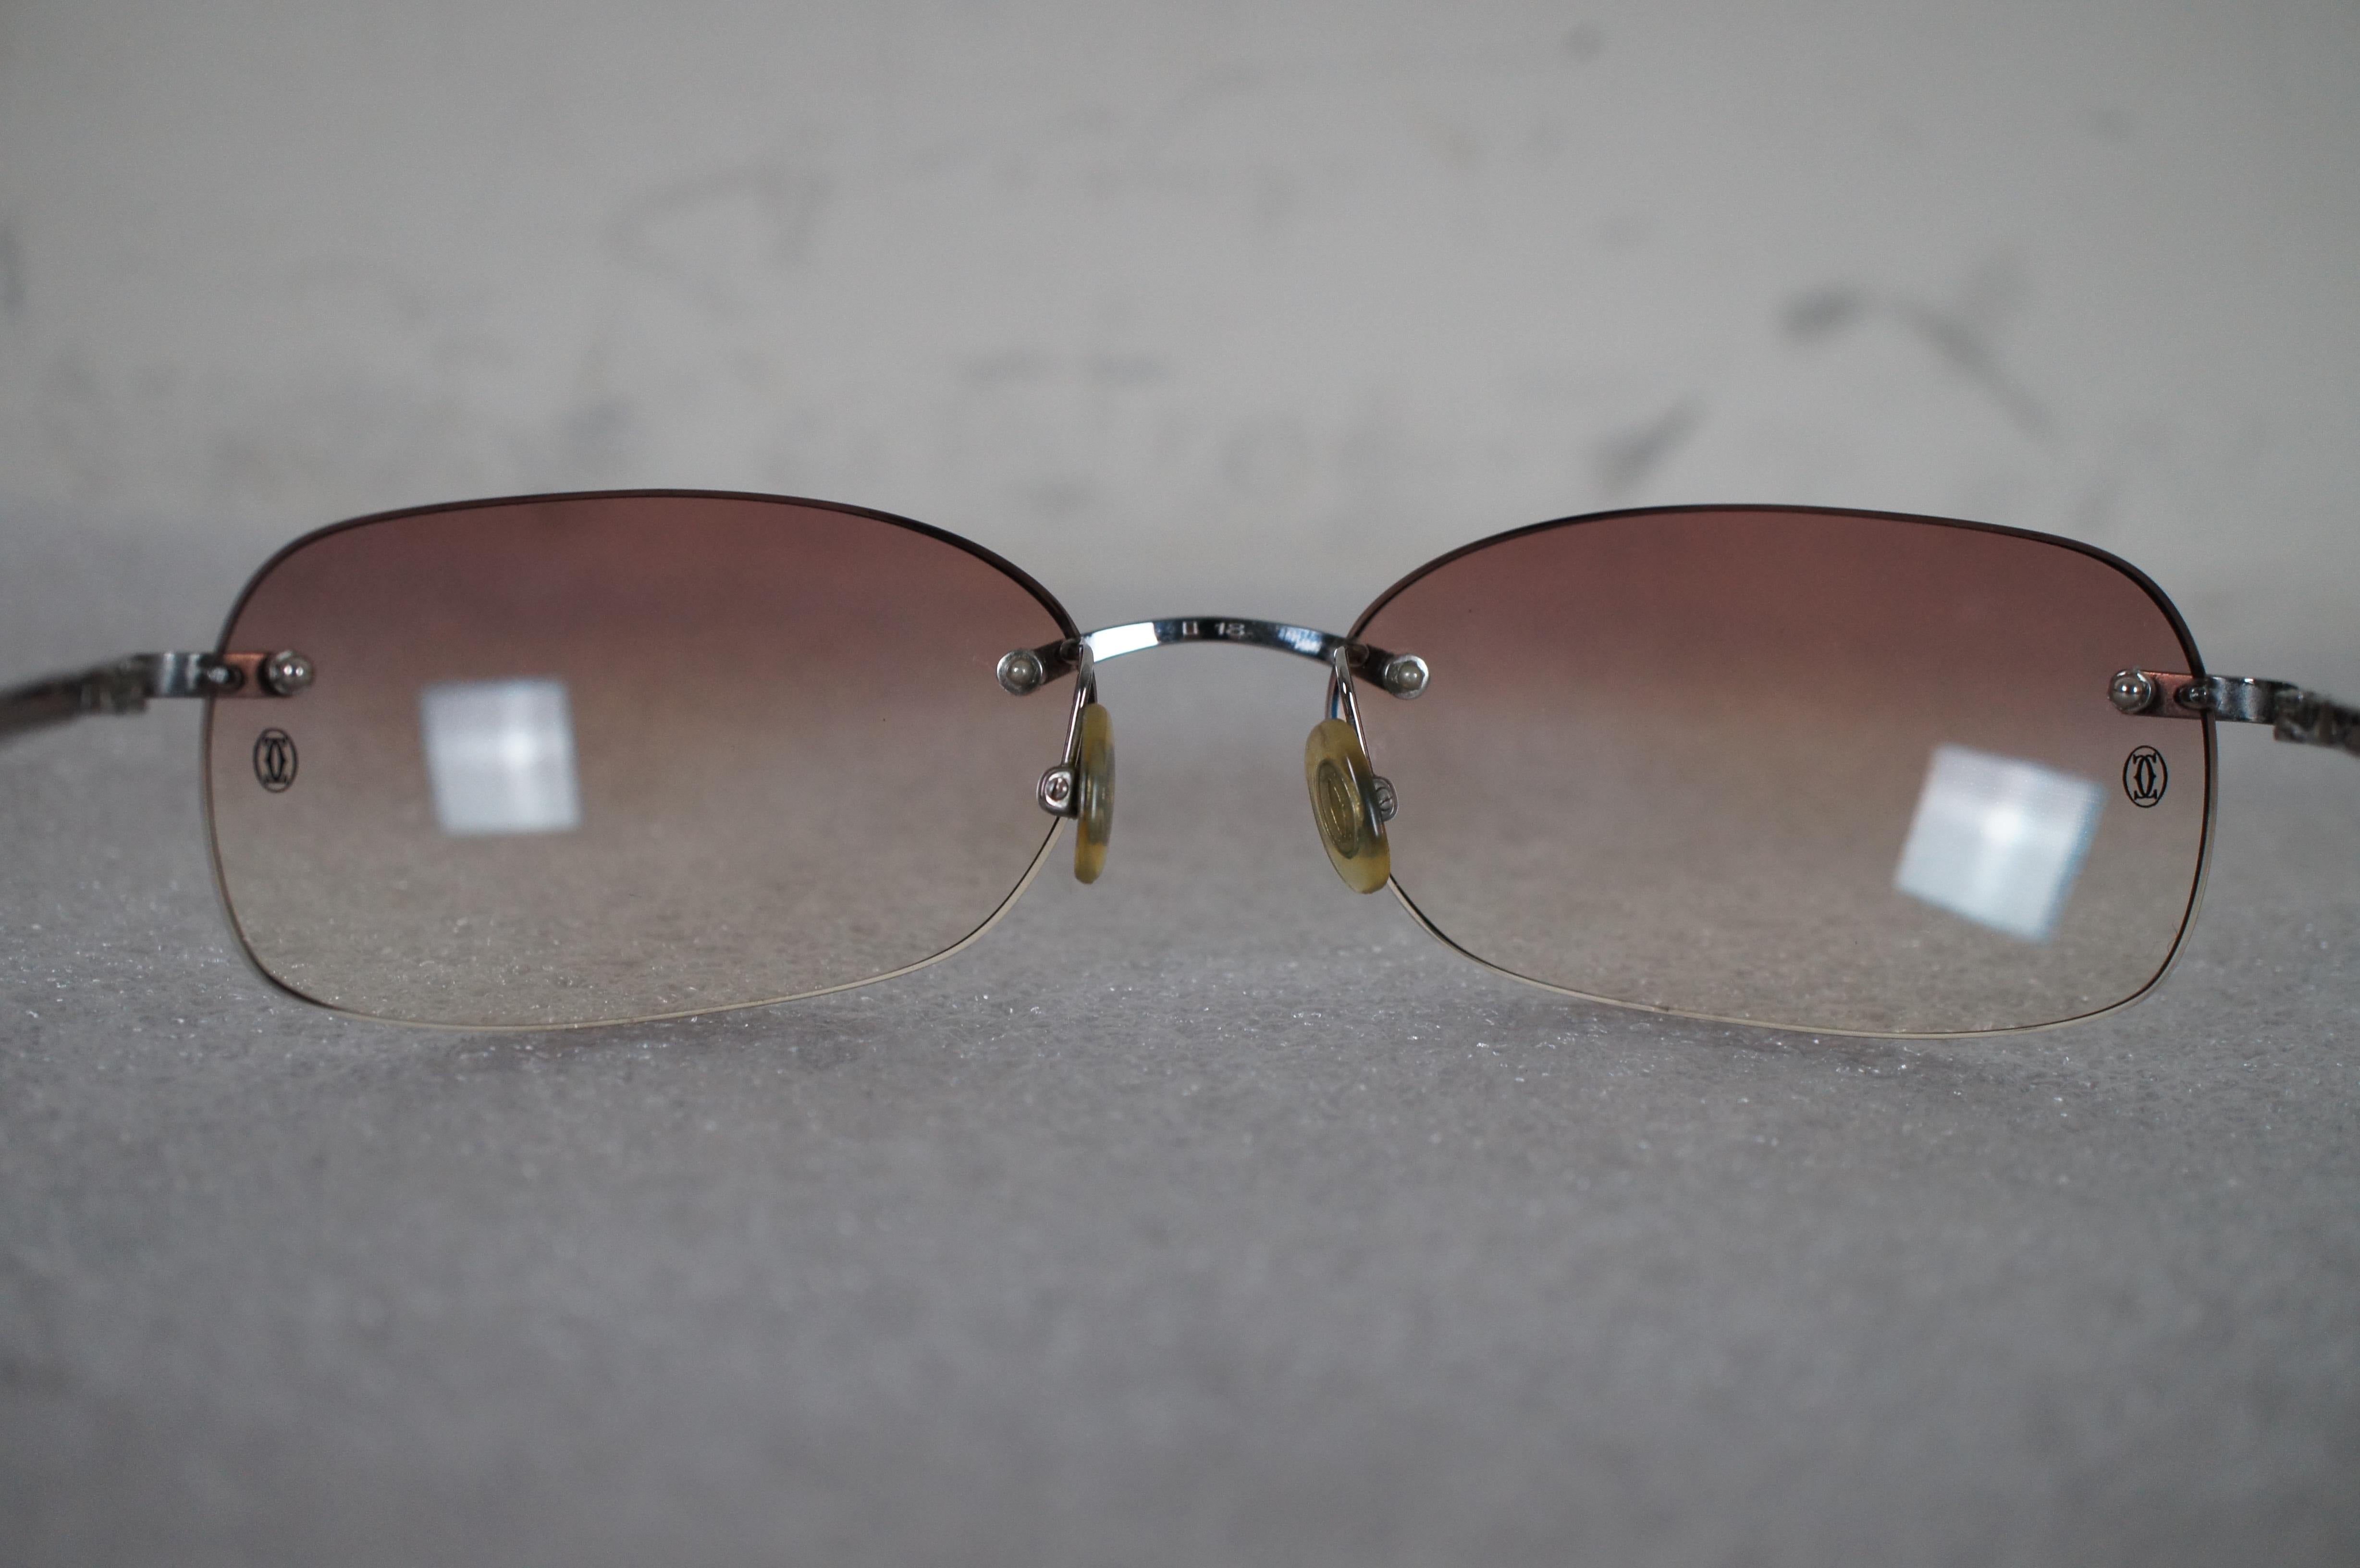 Cartier France Titanium 18 135 Rimless Sunglasses Eyeglasses Pink Gradient Case In Good Condition For Sale In Dayton, OH